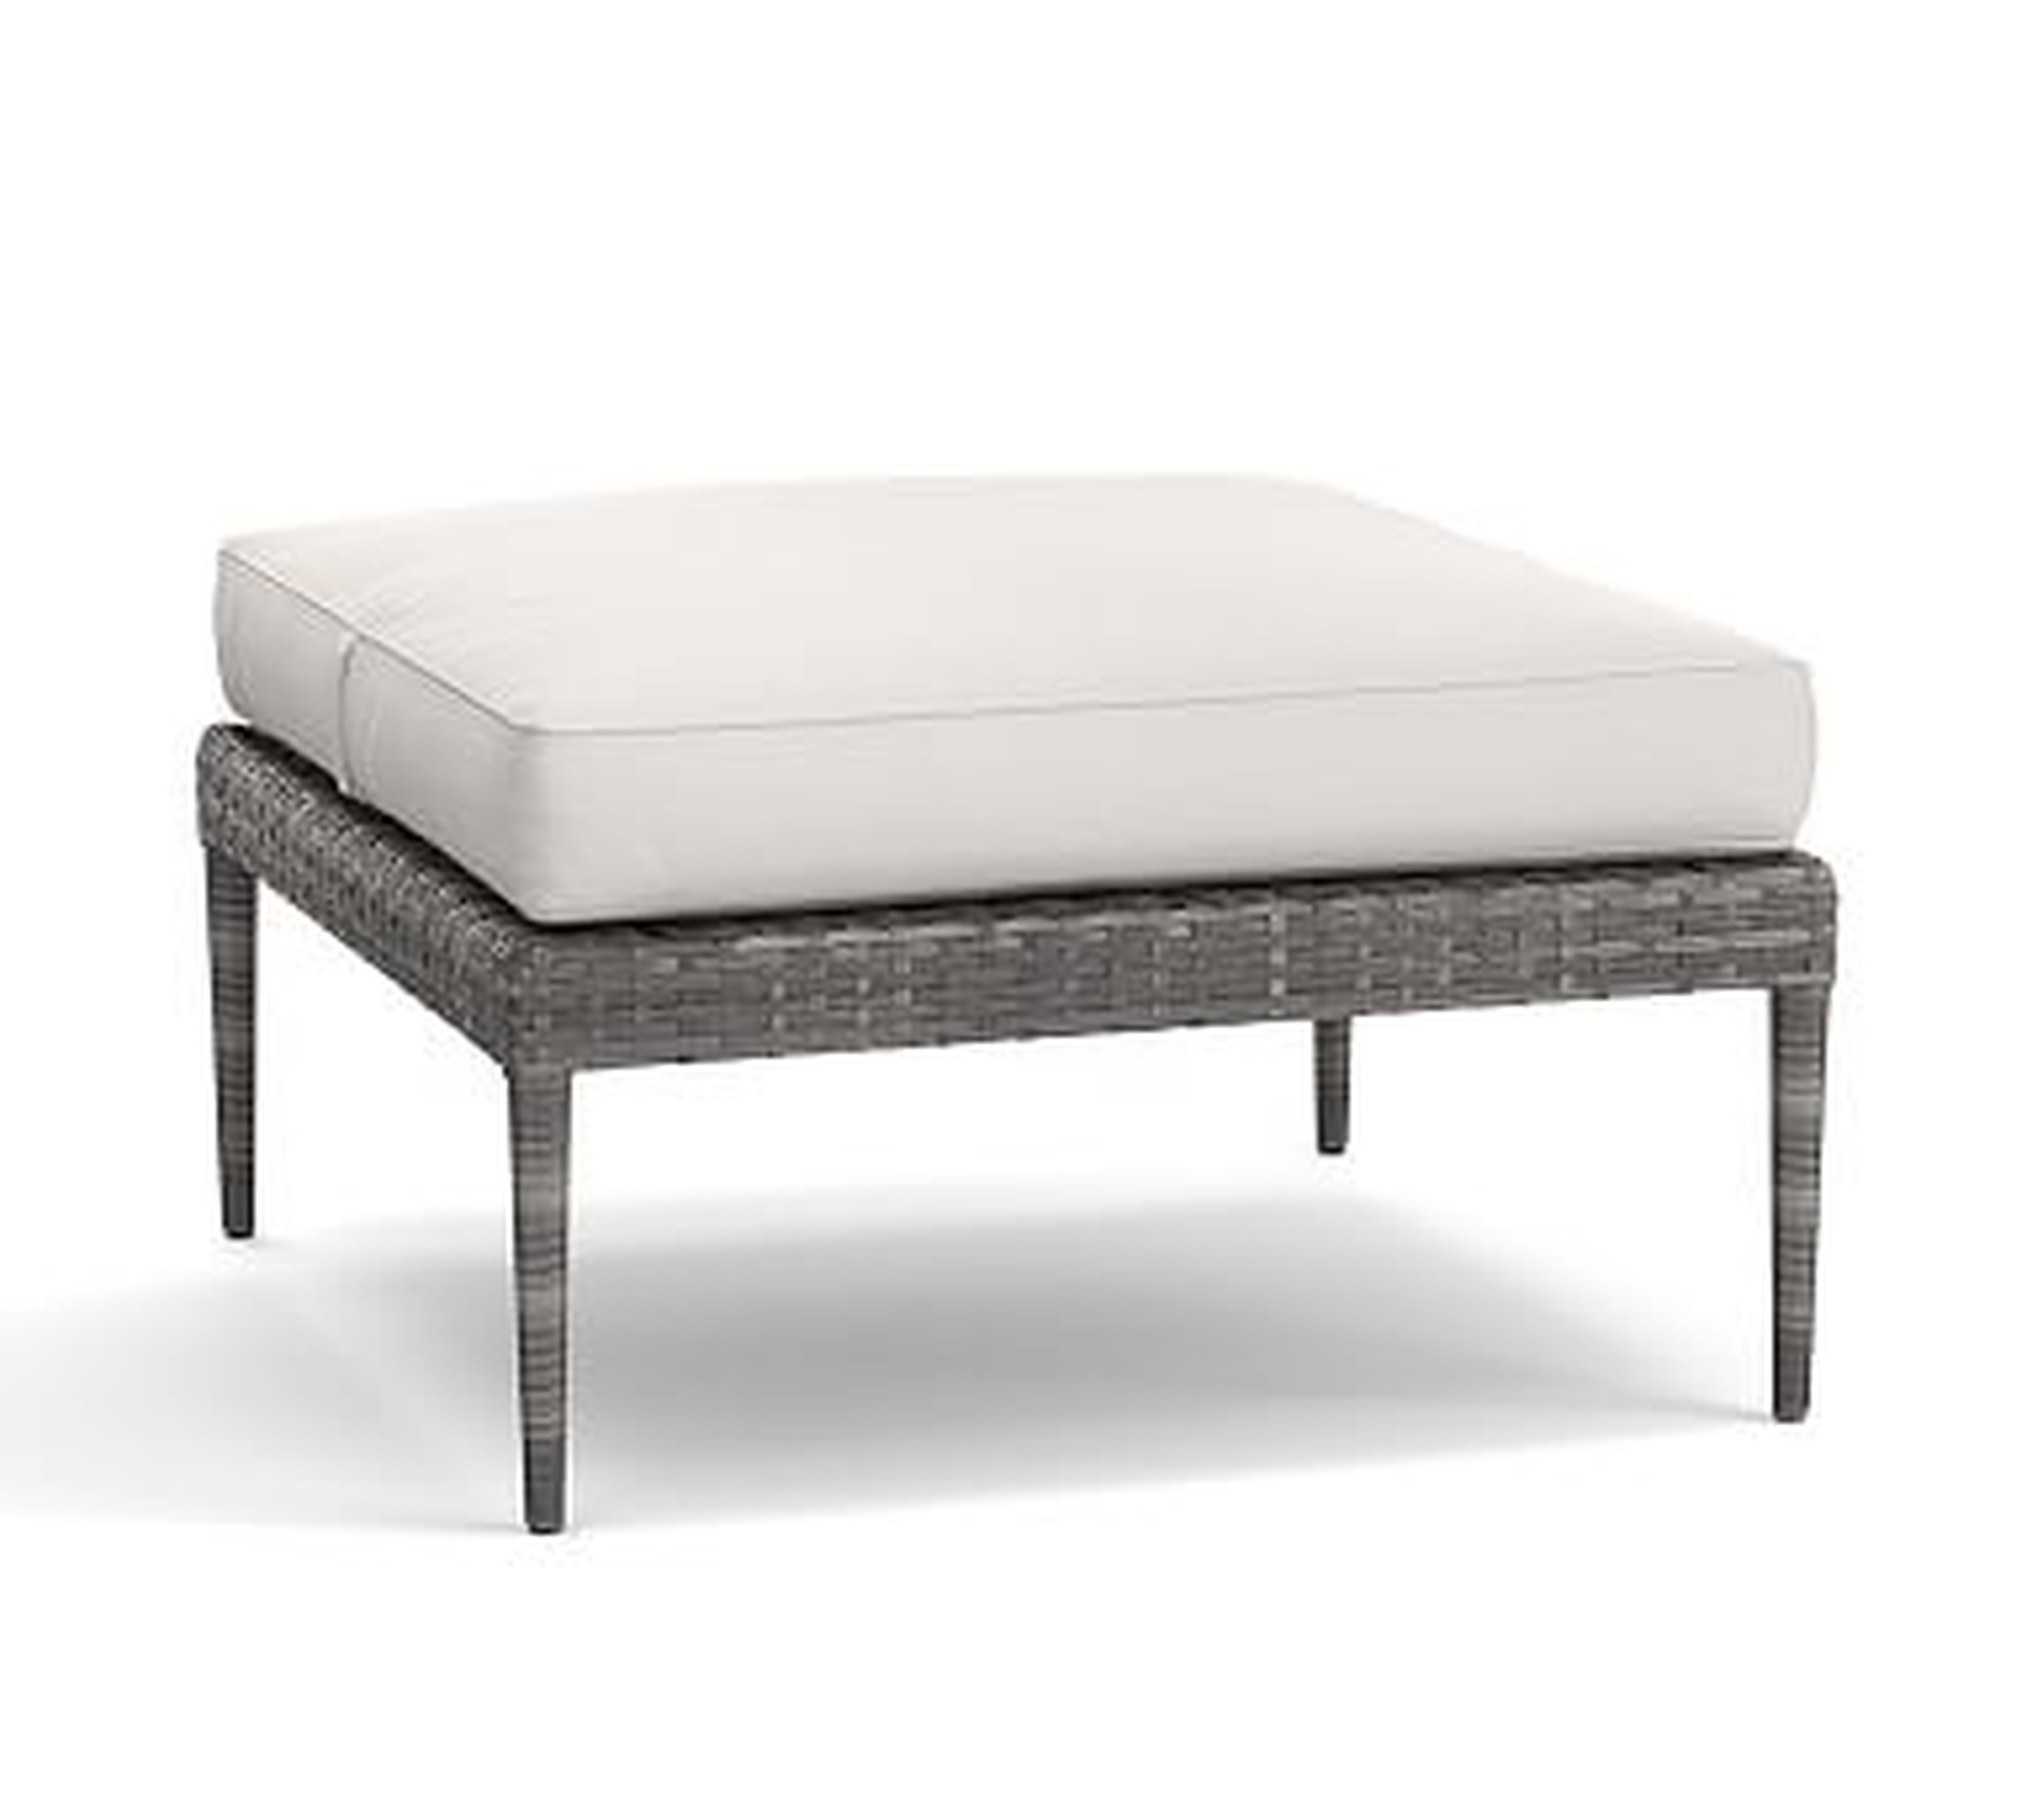 Cammeray All-Weather Wicker Sectional, Ottoman with Cushion, Gray - Pottery Barn